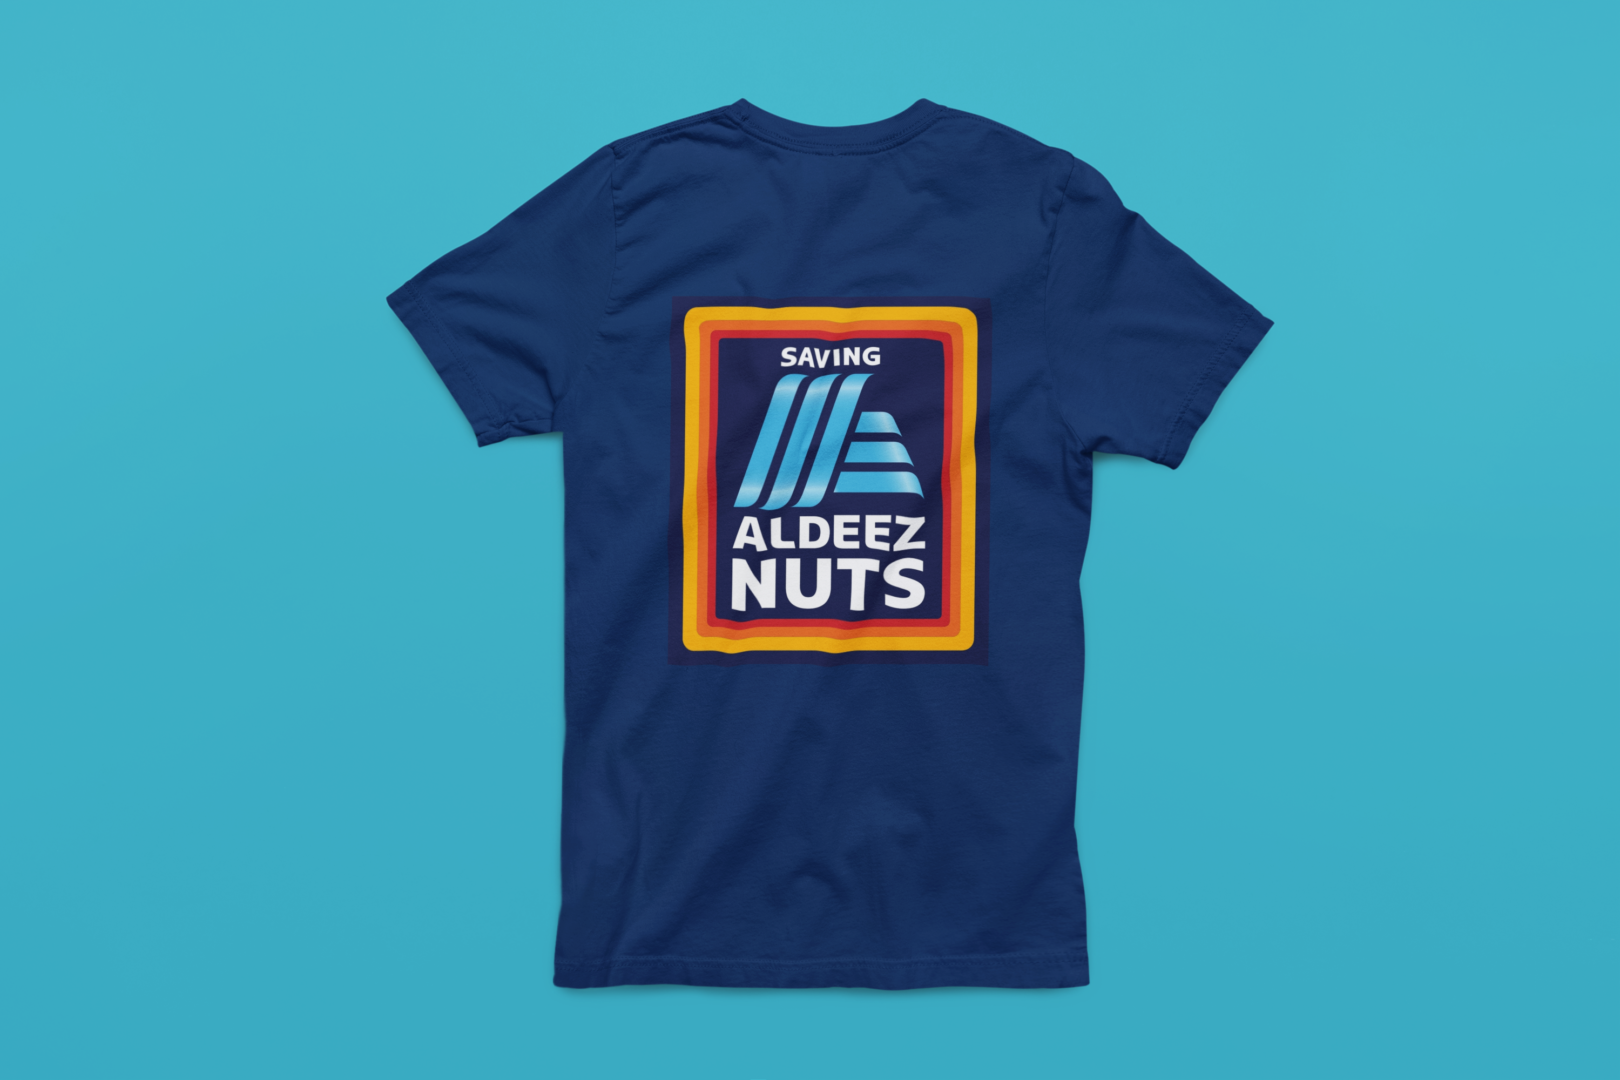 A blue t-shirt with the words "ALLDEEZ NUTS" on it.